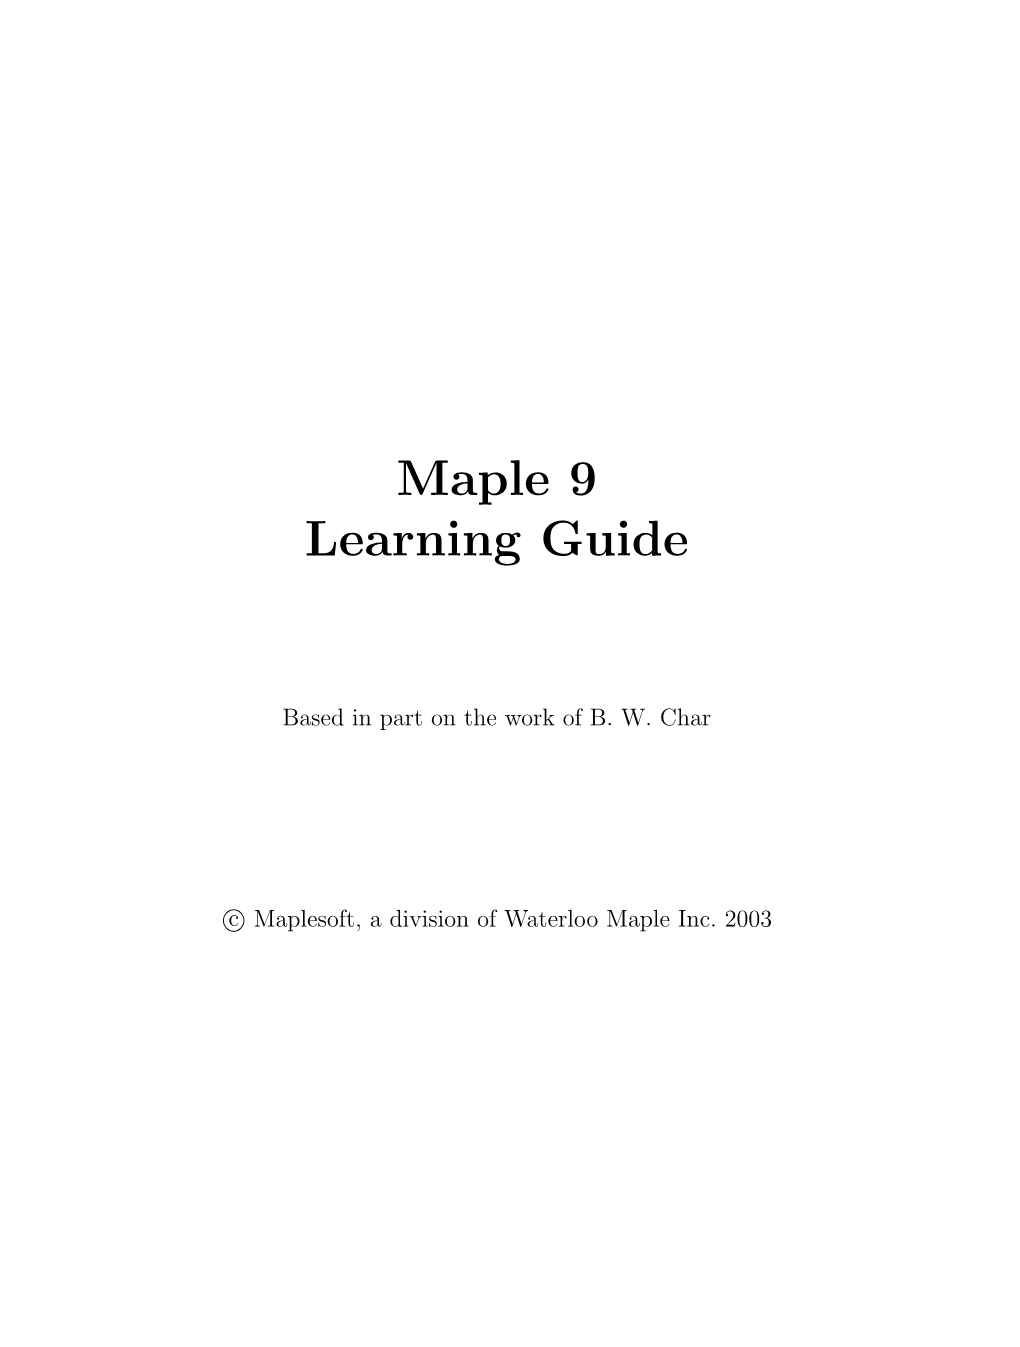 Maple 9 Learning Guide